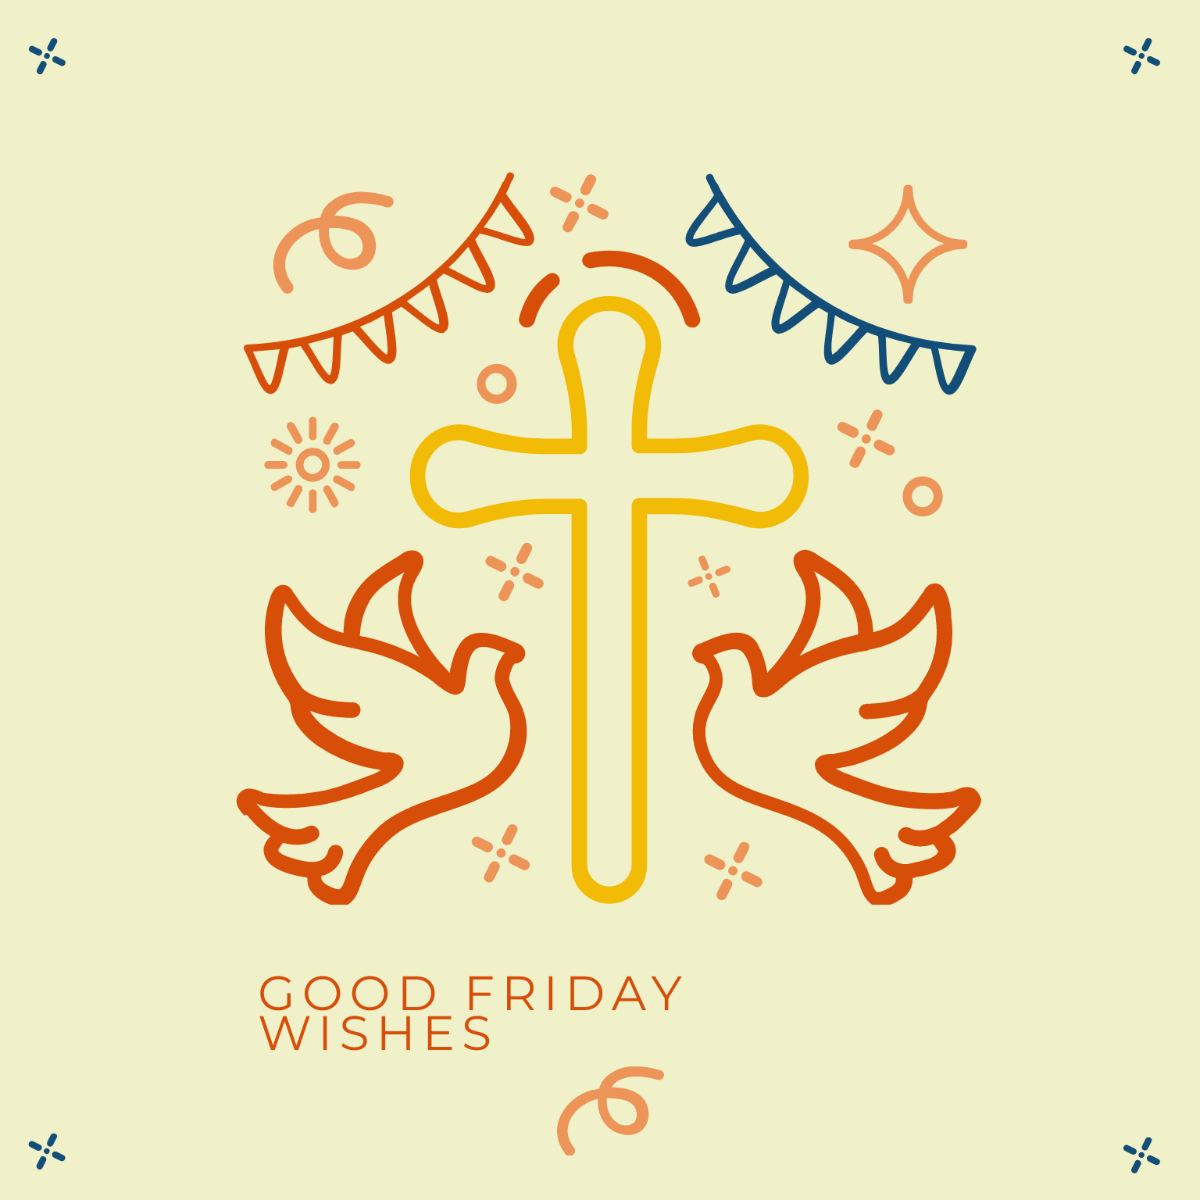 Free Good Friday Wishes Vector Template